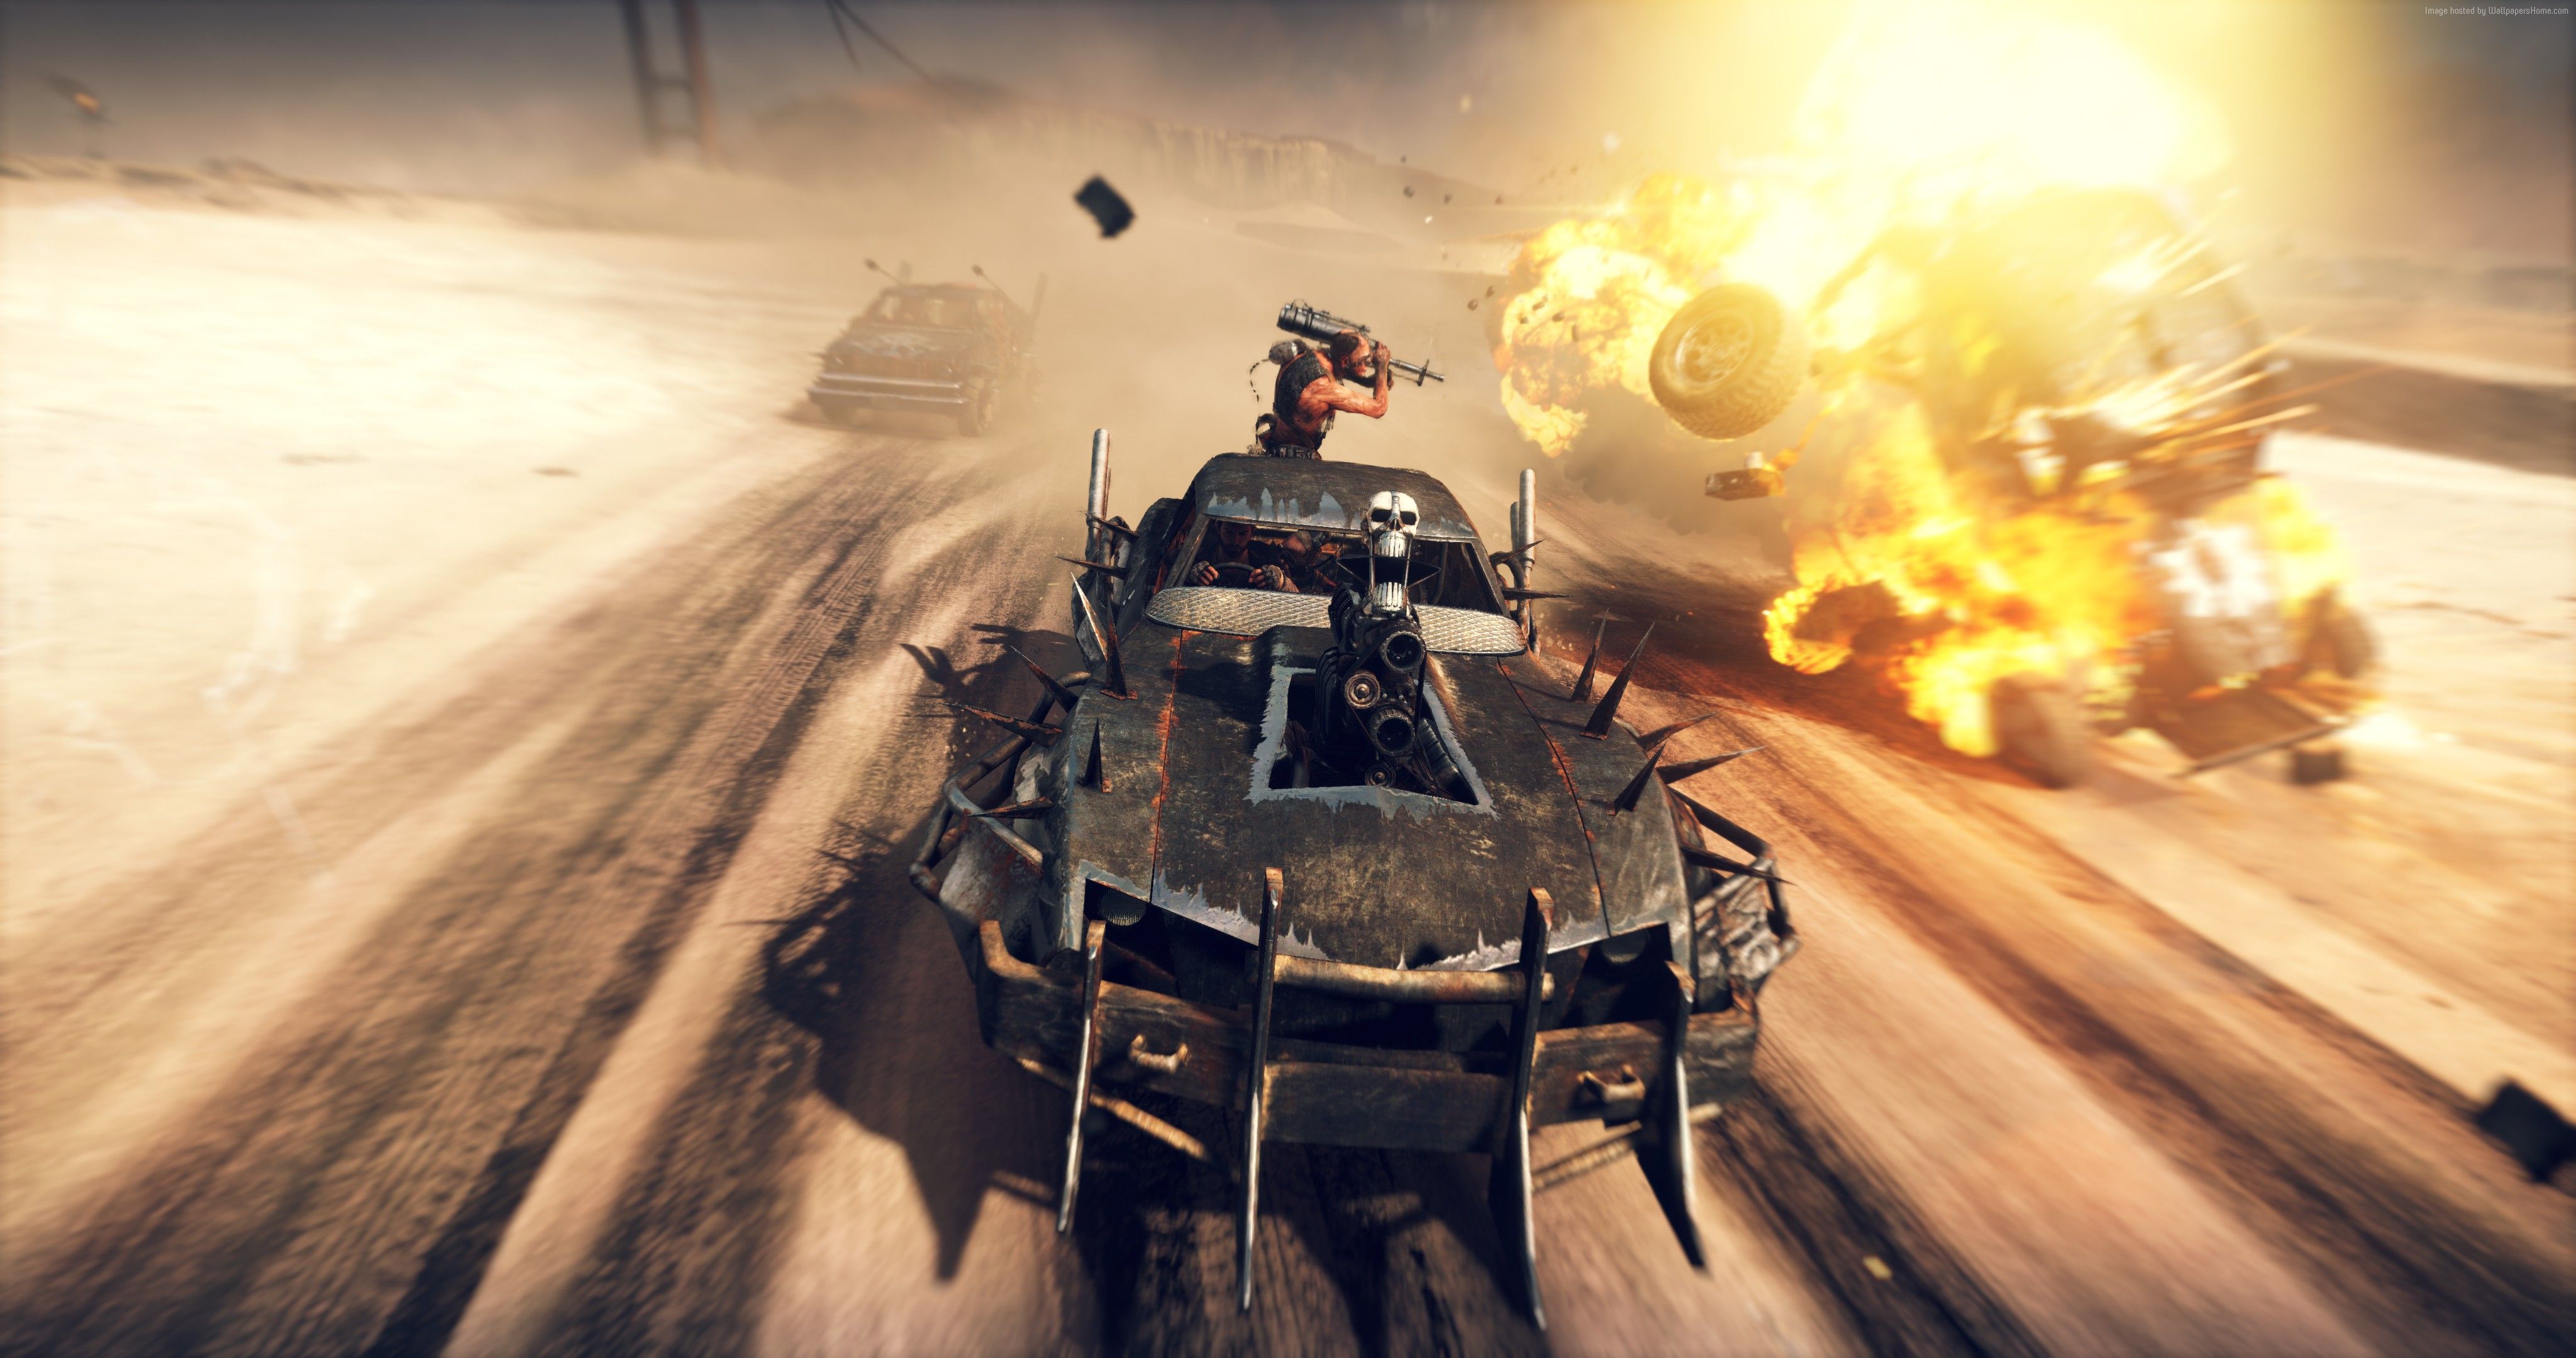 Mad Max Wallpaper, Games / Recent: Mad Max, Best Games 2015, game ...